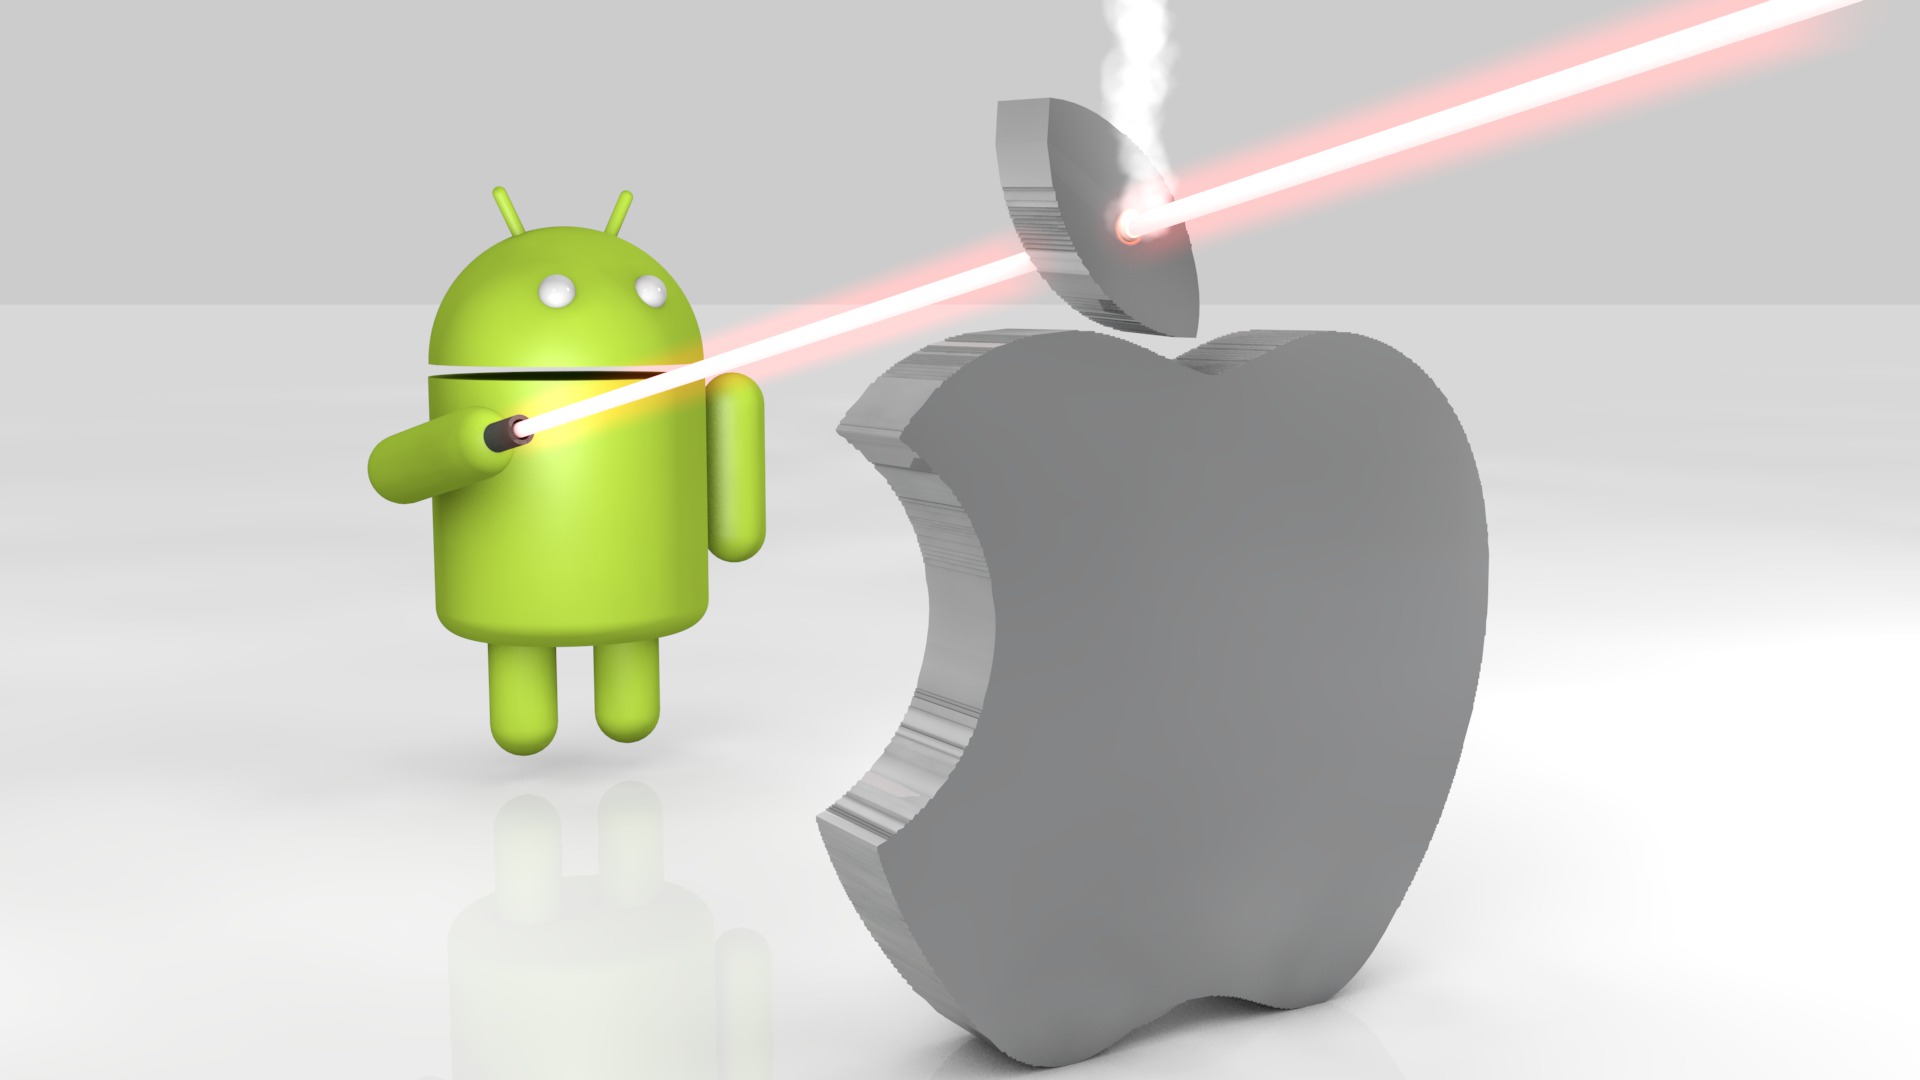 Android Vs Apple Hd 1080p Wallpaper Brands And Logos Wallpaper Better